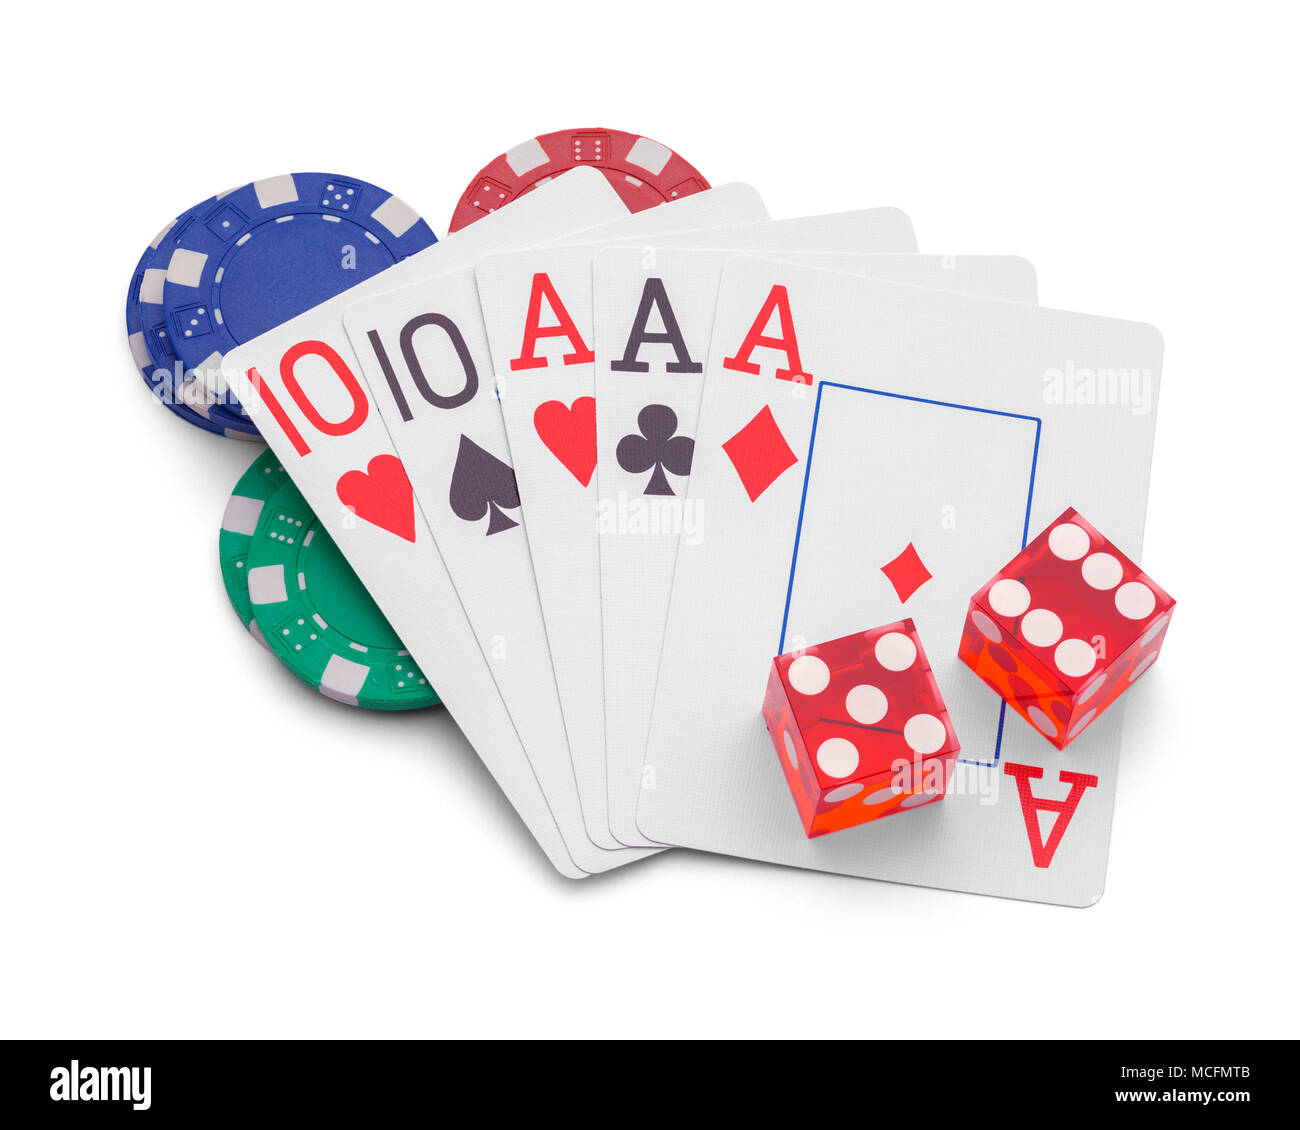 Gambling Playing Cards With Dice and Casino Chips Isolated on White Background. Stock Photo